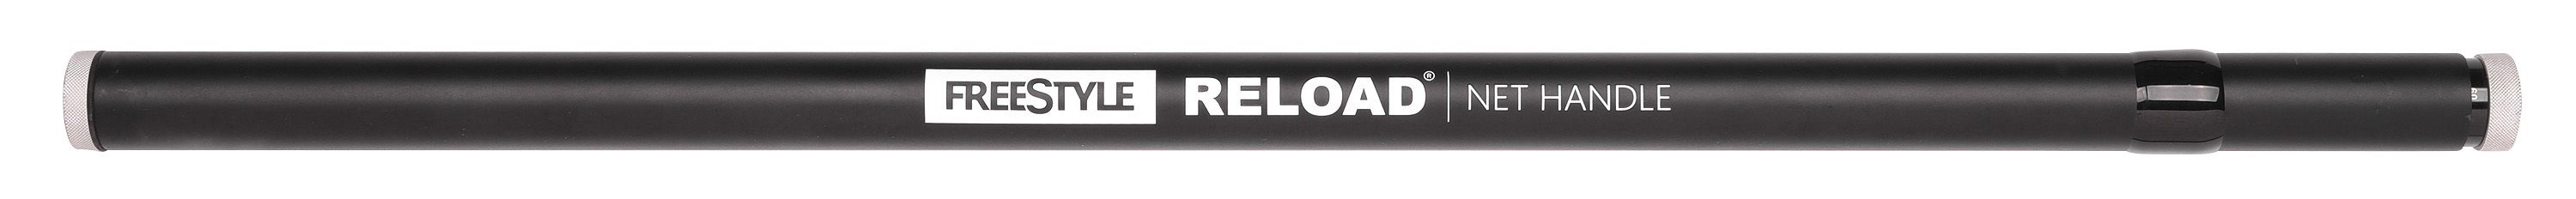 Spro Freestyle Reload Net Handle - 2,00m